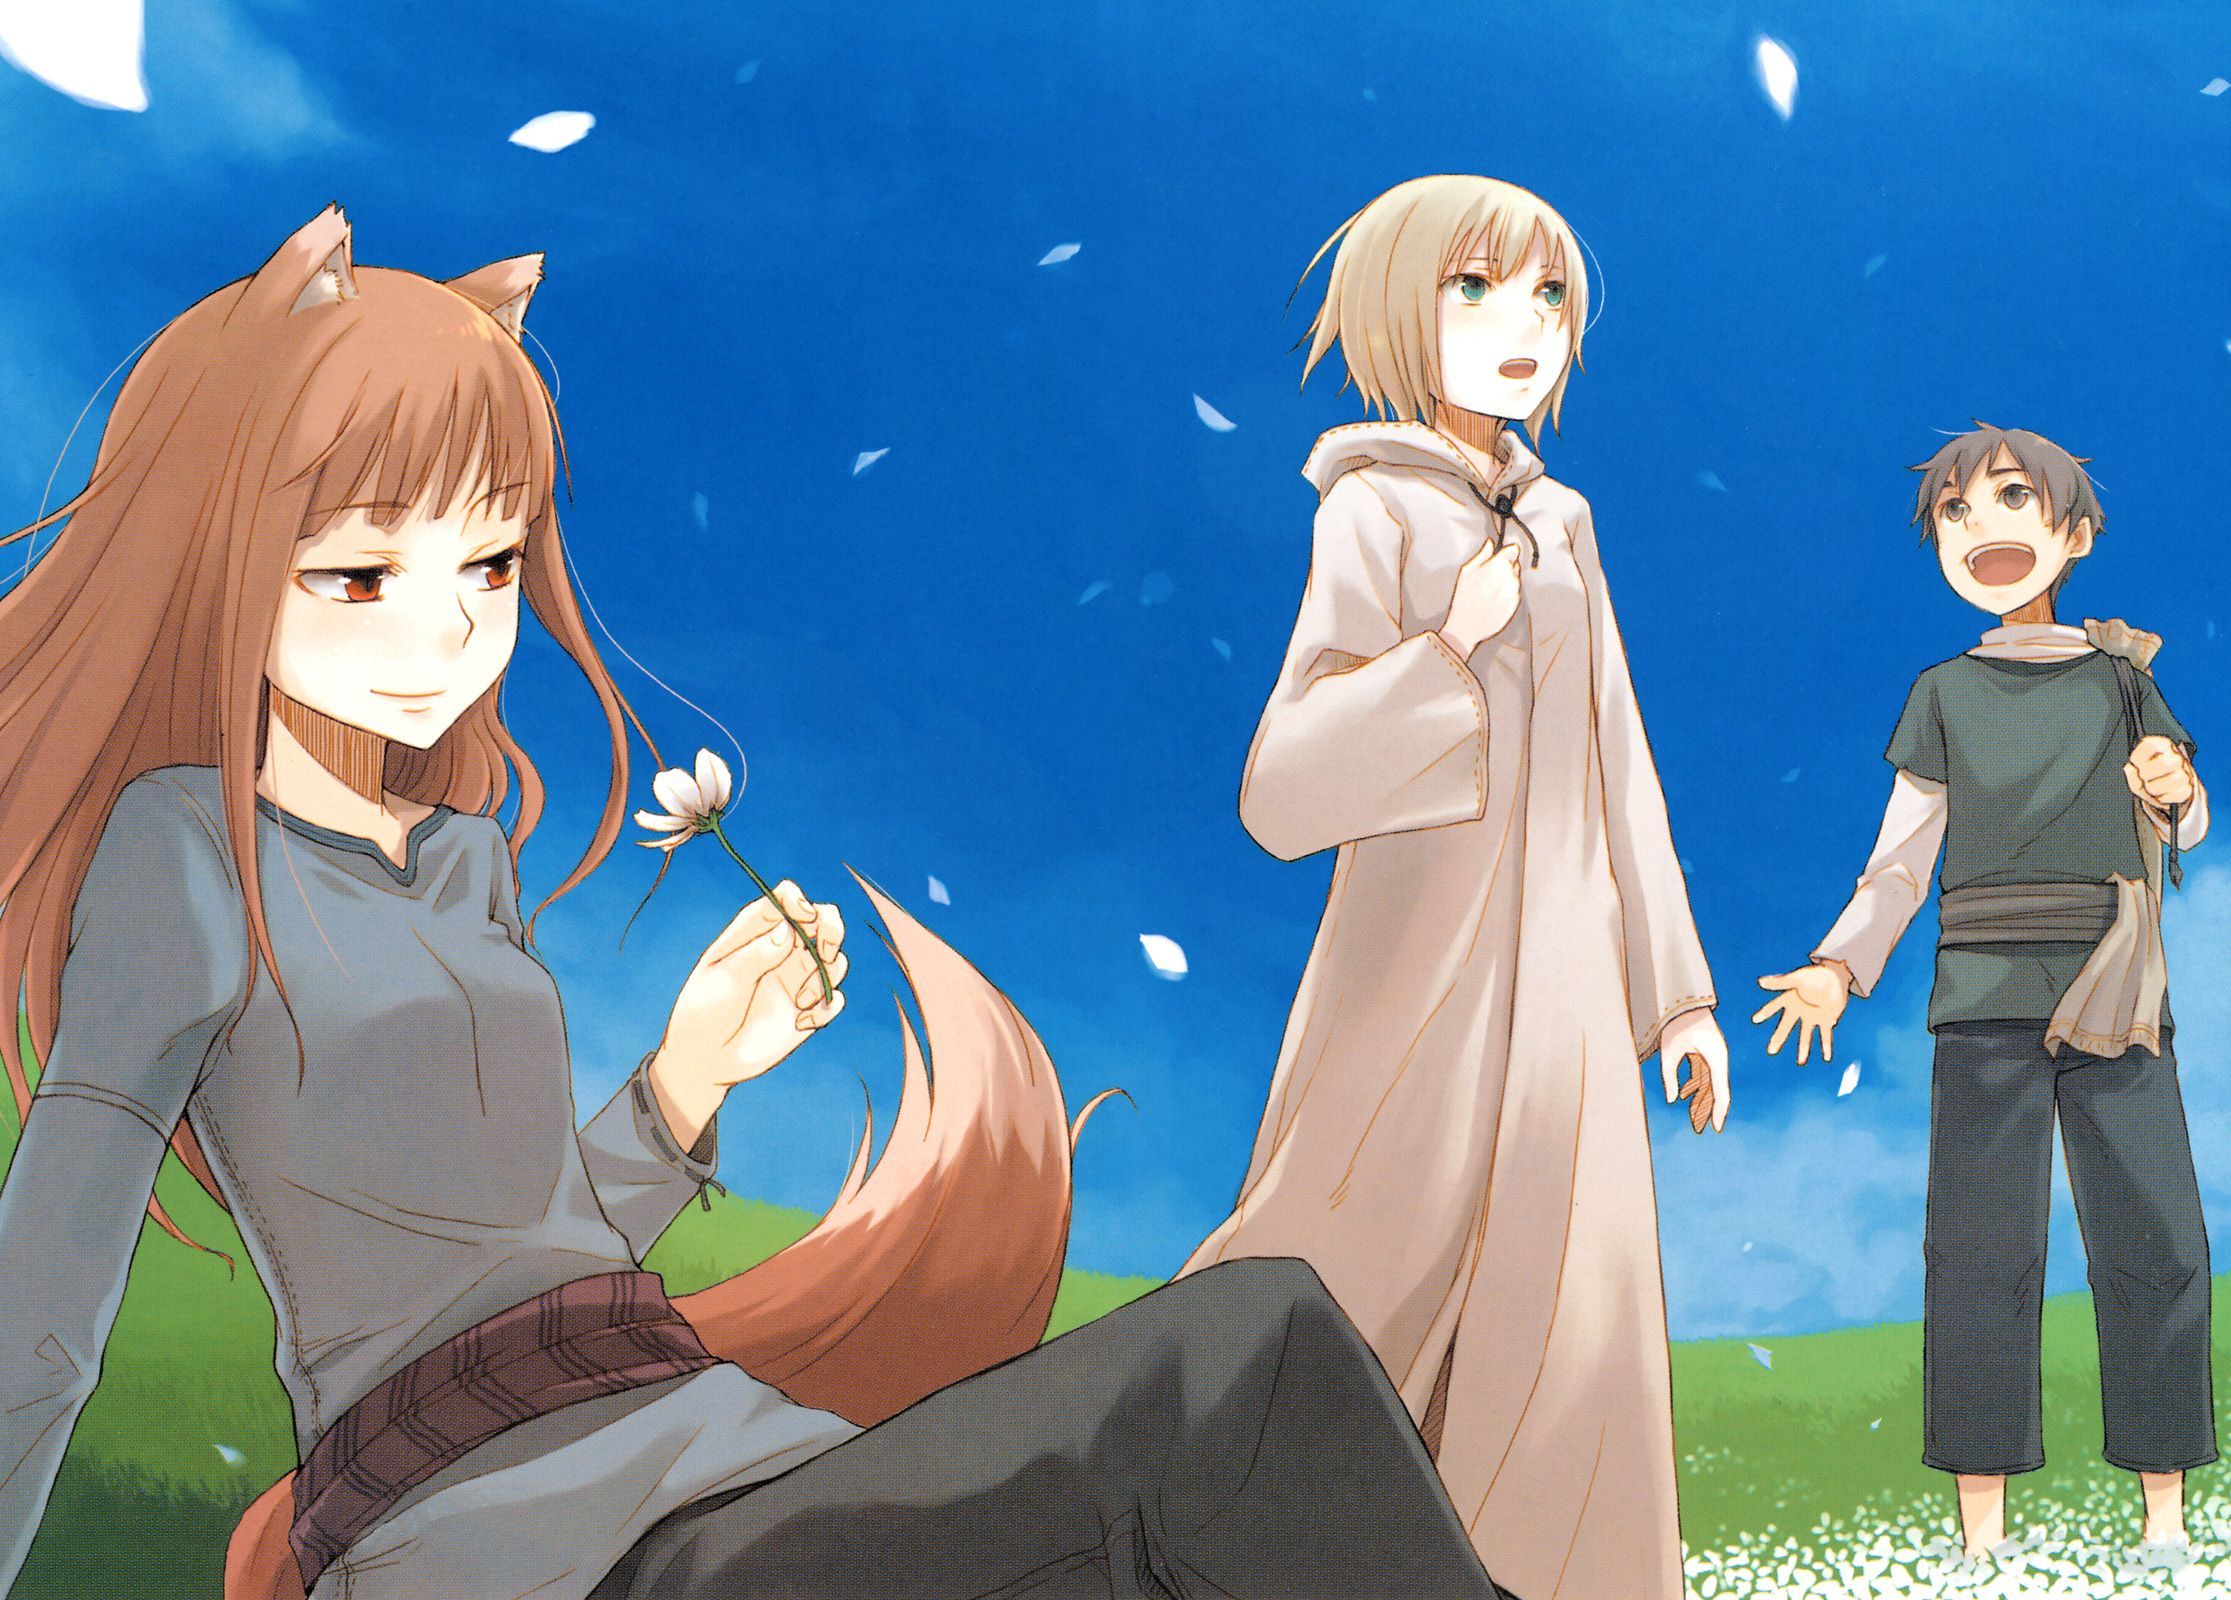 Spice And Wolf HD Wallpaper. Background. Spice and wolf, Anime, Wolf wallpaper